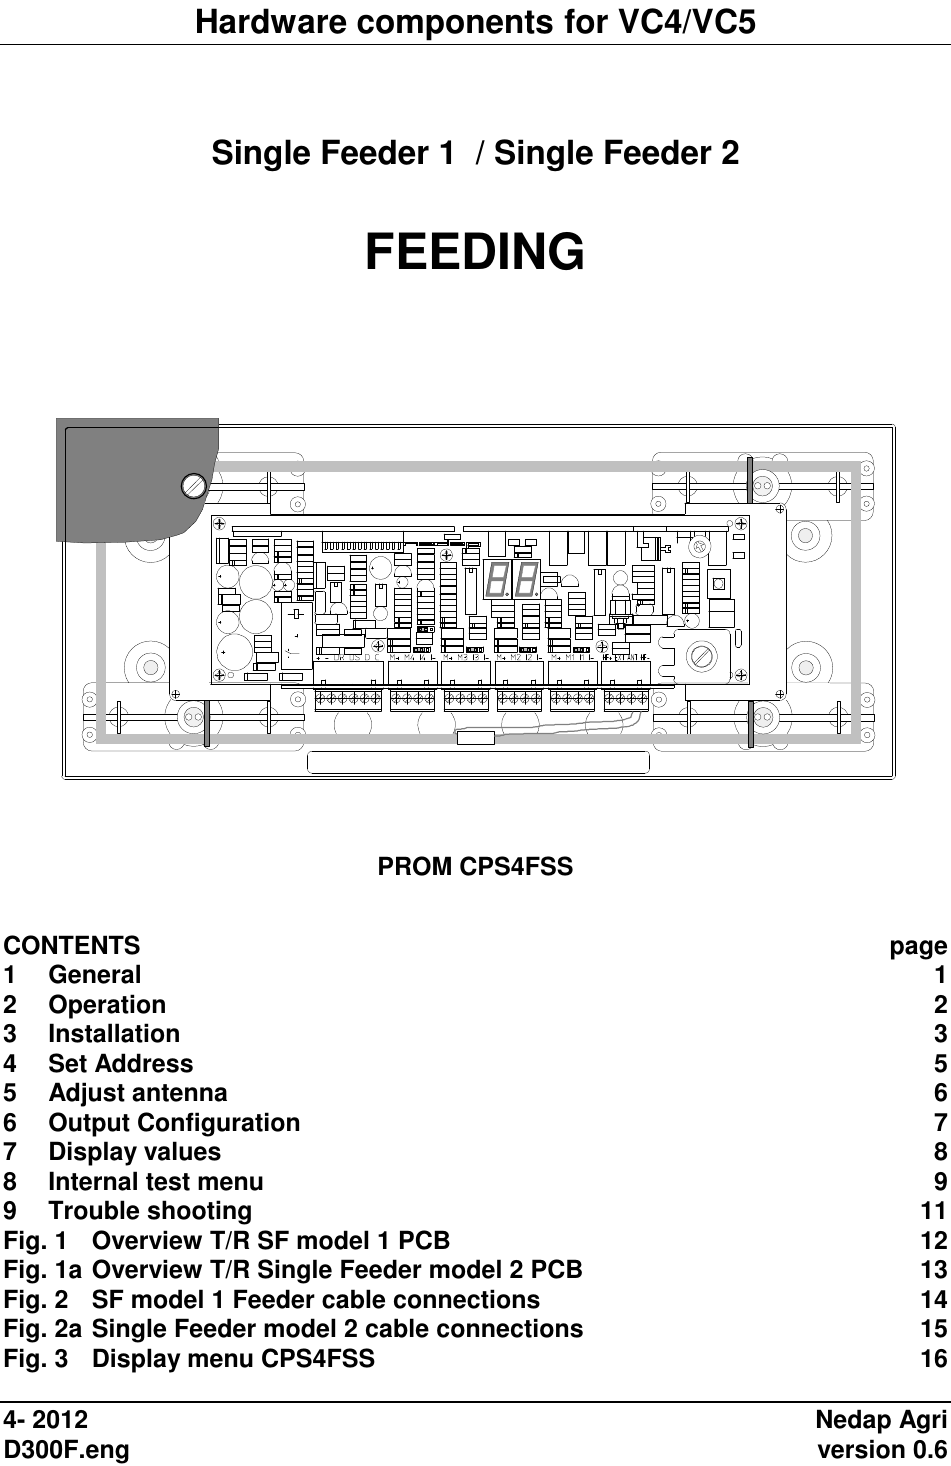 Hardware components for VC4/VC5   Single Feeder 1  / Single Feeder 2  FEEDING        PROM CPS4FSS  CONTENTS  page 1 General  1 2 Operation  2 3 Installation  3 4 Set Address  5 5 Adjust antenna  6 6 Output Configuration  7 7 Display values  8 8 Internal test menu  9 9 Trouble shooting  11 Fig. 1 Overview T/R SF model 1 PCB  12 Fig. 1a Overview T/R Single Feeder model 2 PCB  13 Fig. 2 SF model 1 Feeder cable connections  14 Fig. 2a Single Feeder model 2 cable connections  15 Fig. 3 Display menu CPS4FSS  16  4- 2012  Nedap Agri D300F.eng    version 0.6 